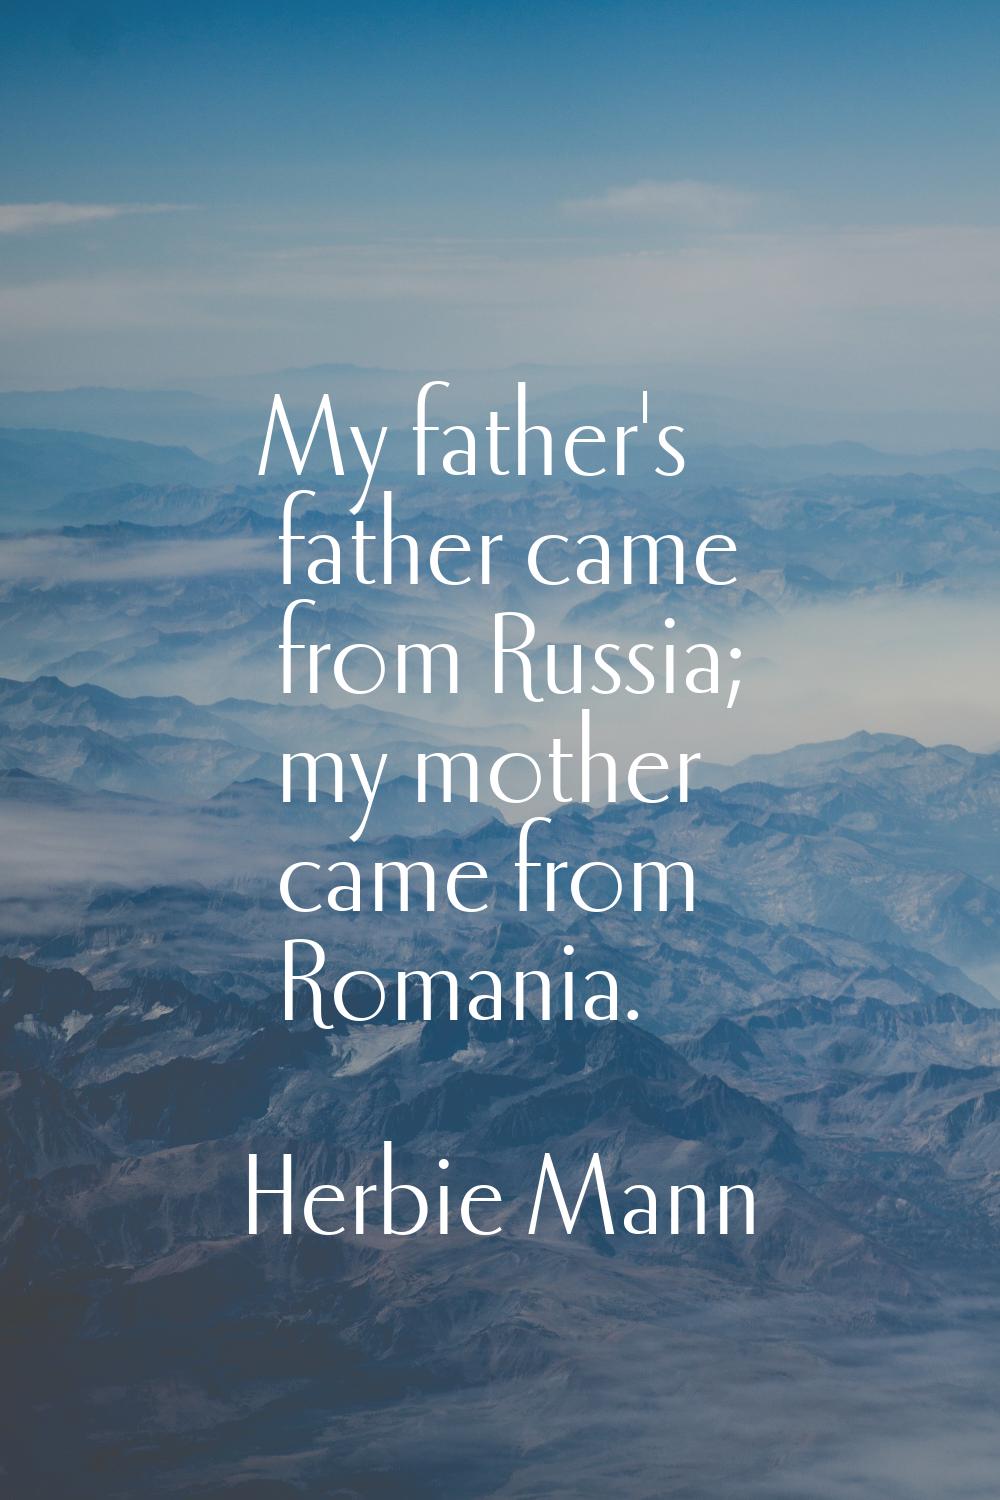 My father's father came from Russia; my mother came from Romania.